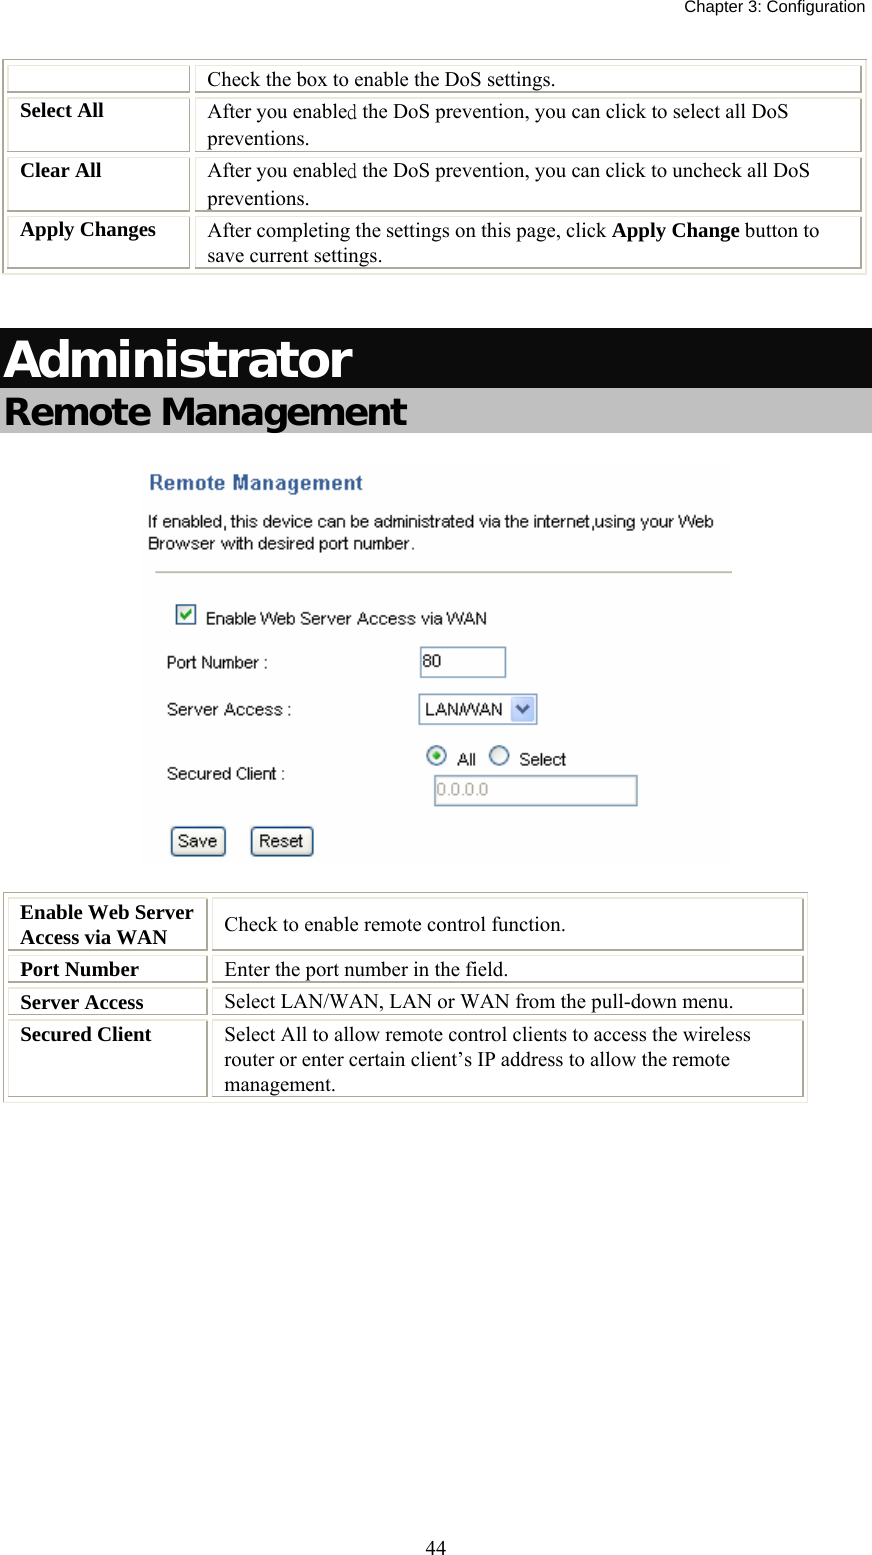   Chapter 3: Configuration  44Check the box to enable the DoS settings. Select All  After you enabled the DoS prevention, you can click to select all DoS preventions. Clear All  After you enabled the DoS prevention, you can click to uncheck all DoS preventions. Apply Changes  After completing the settings on this page, click Apply Change button to save current settings.  Administrator Remote Management  Enable Web Server Access via WAN  Check to enable remote control function. Port Number  Enter the port number in the field.   Server Access  Select LAN/WAN, LAN or WAN from the pull-down menu.  Secured Client  Select All to allow remote control clients to access the wireless router or enter certain client’s IP address to allow the remote management.  